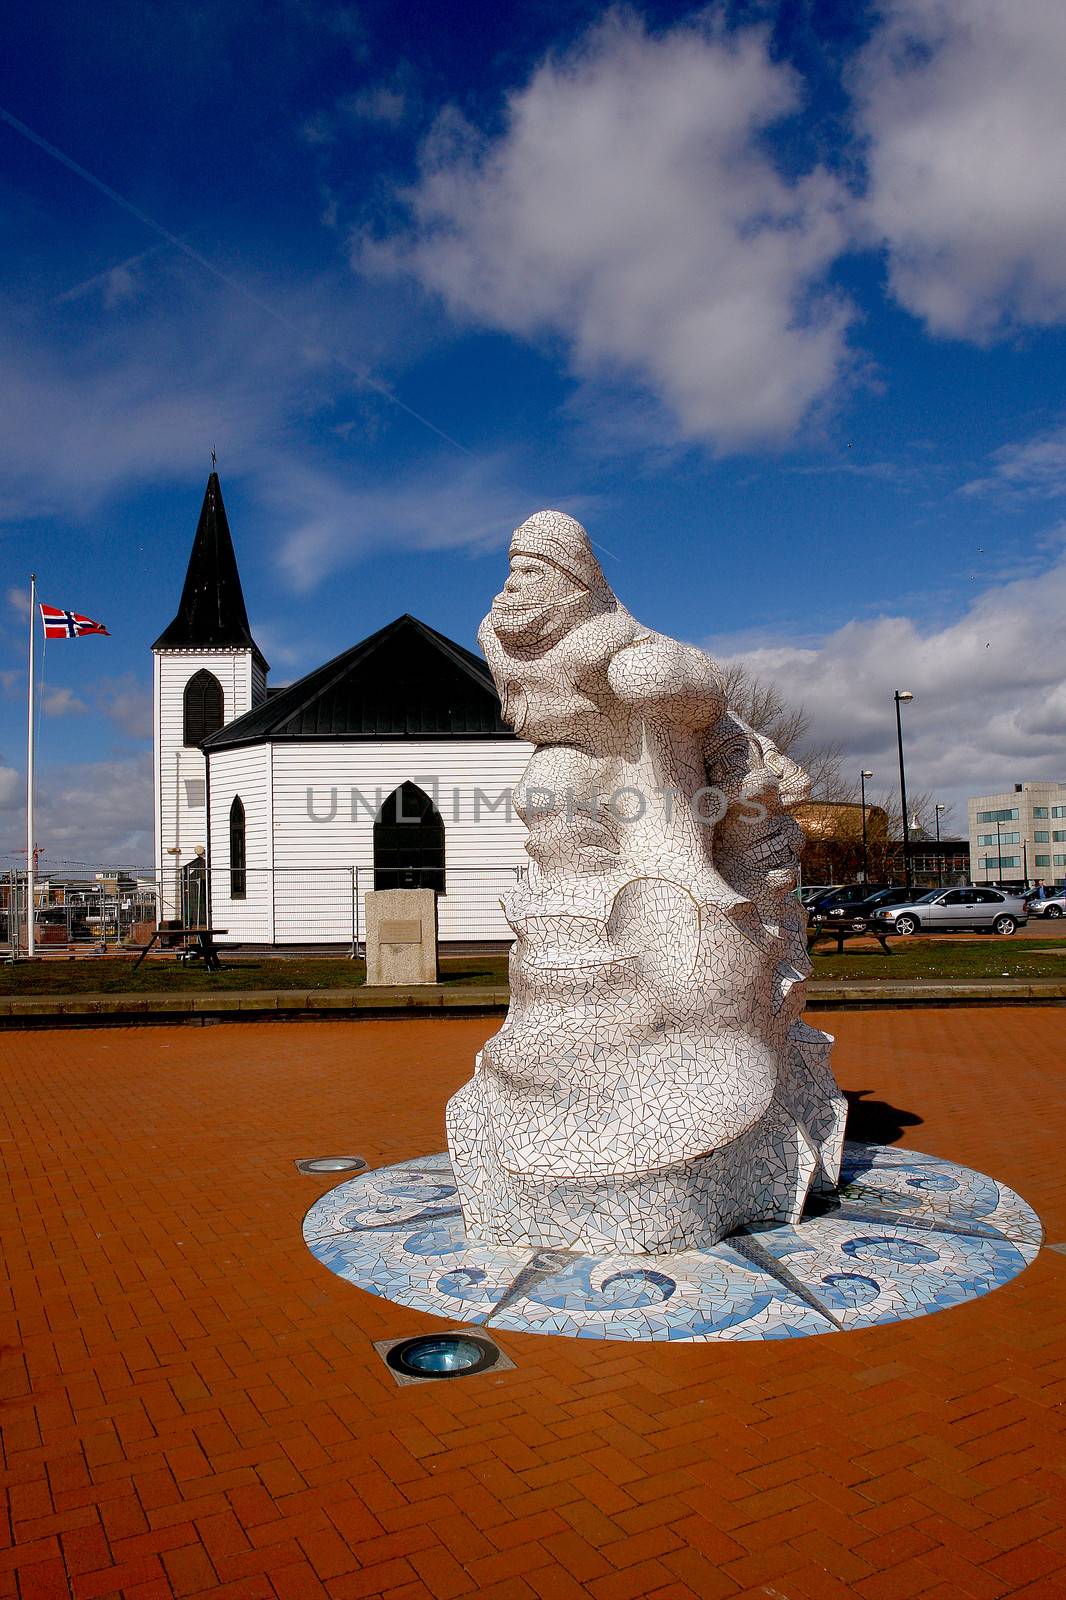 Norwegian Church with seafarers statue in Cardiff Bay, Wales. by ptxgarfield